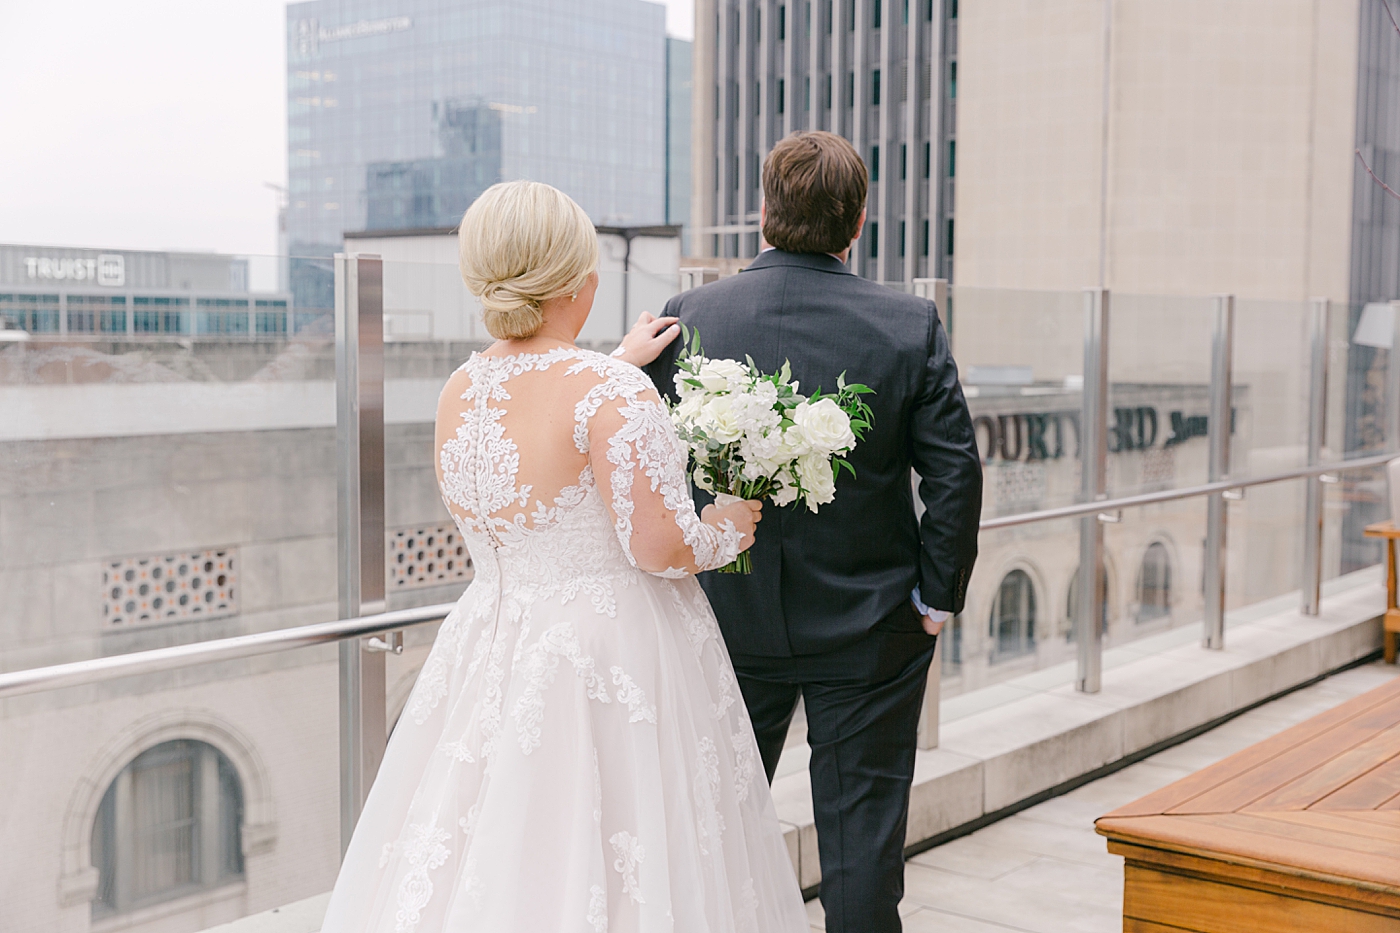 Bride and groom having their first look | Photo by Hope Helmuth Photography